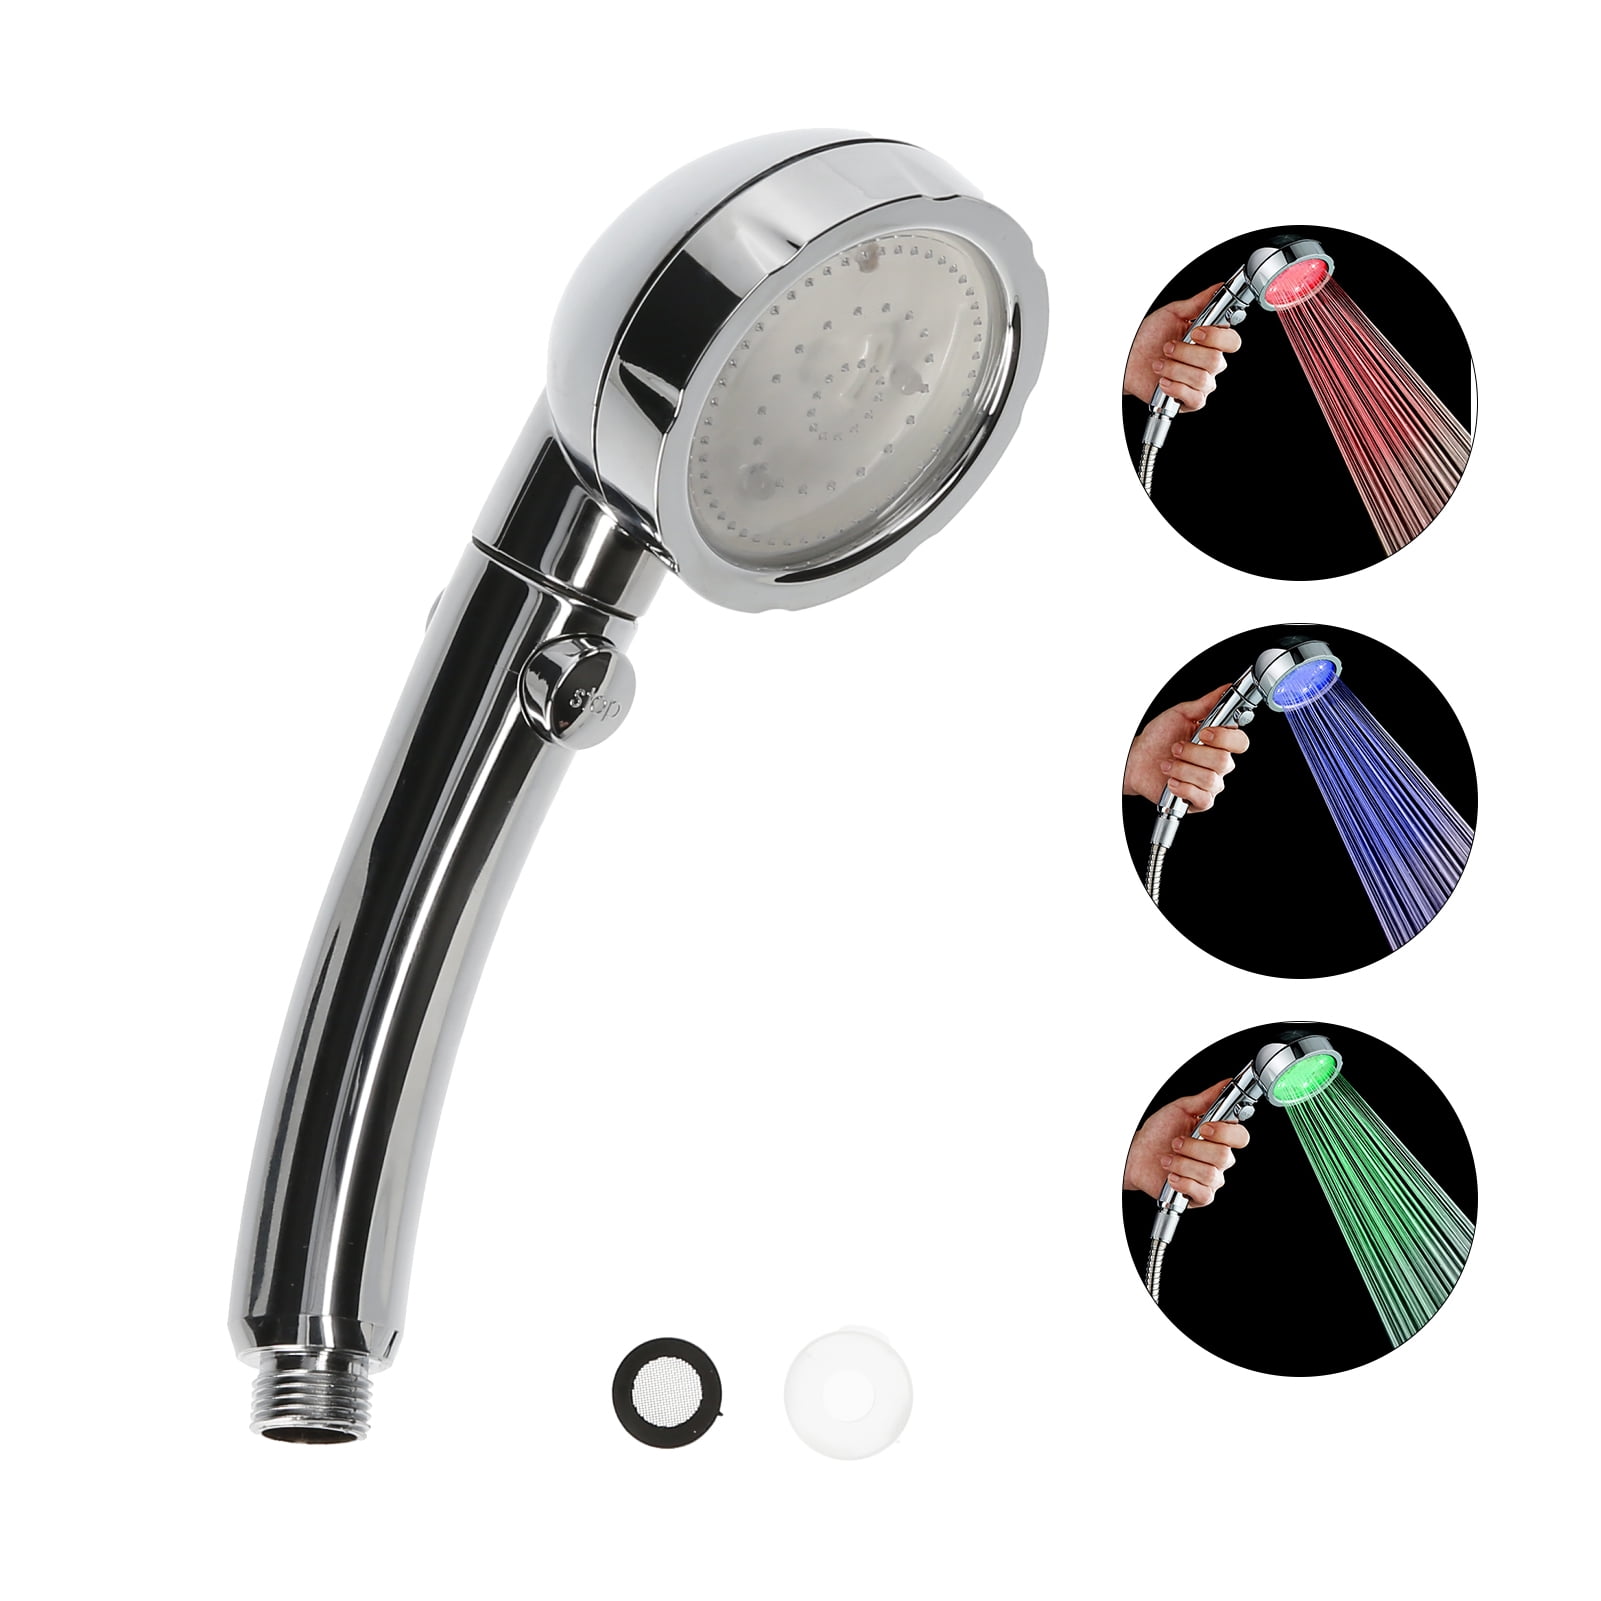 LED Shower Head Automatic Changing 3 Colour LED Light Water Saving Bath Shower 